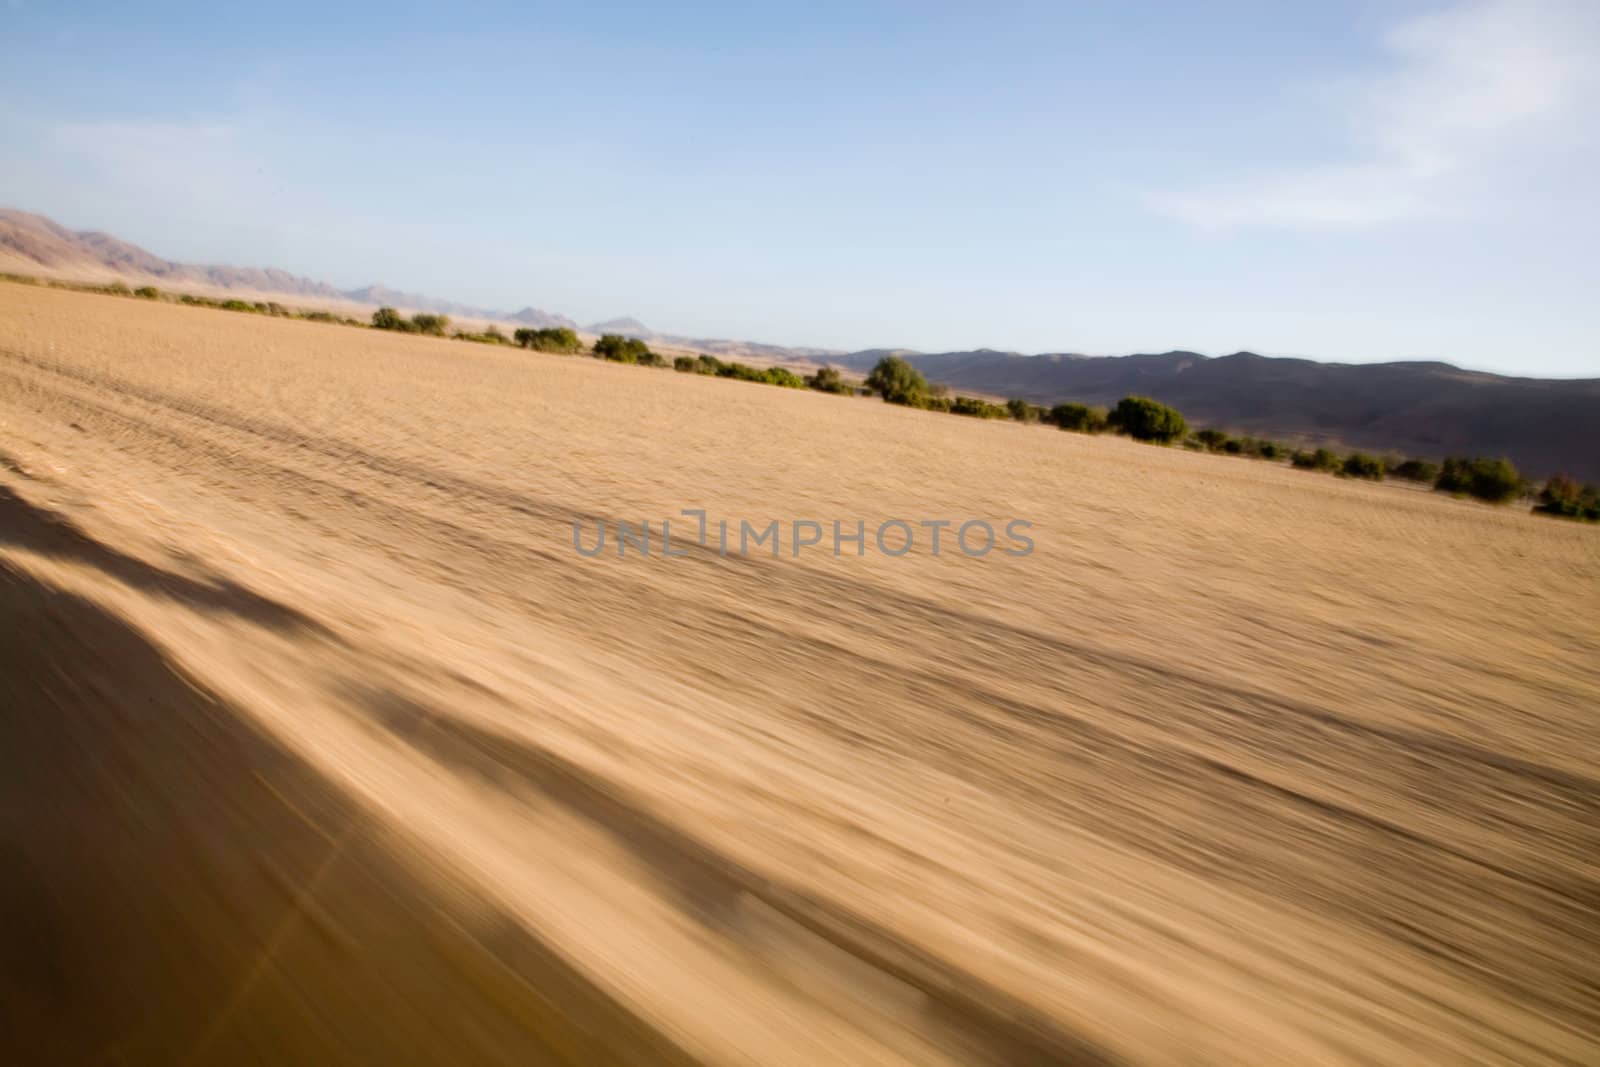 Driving a 4x4 at full speed in the sand in Namibia